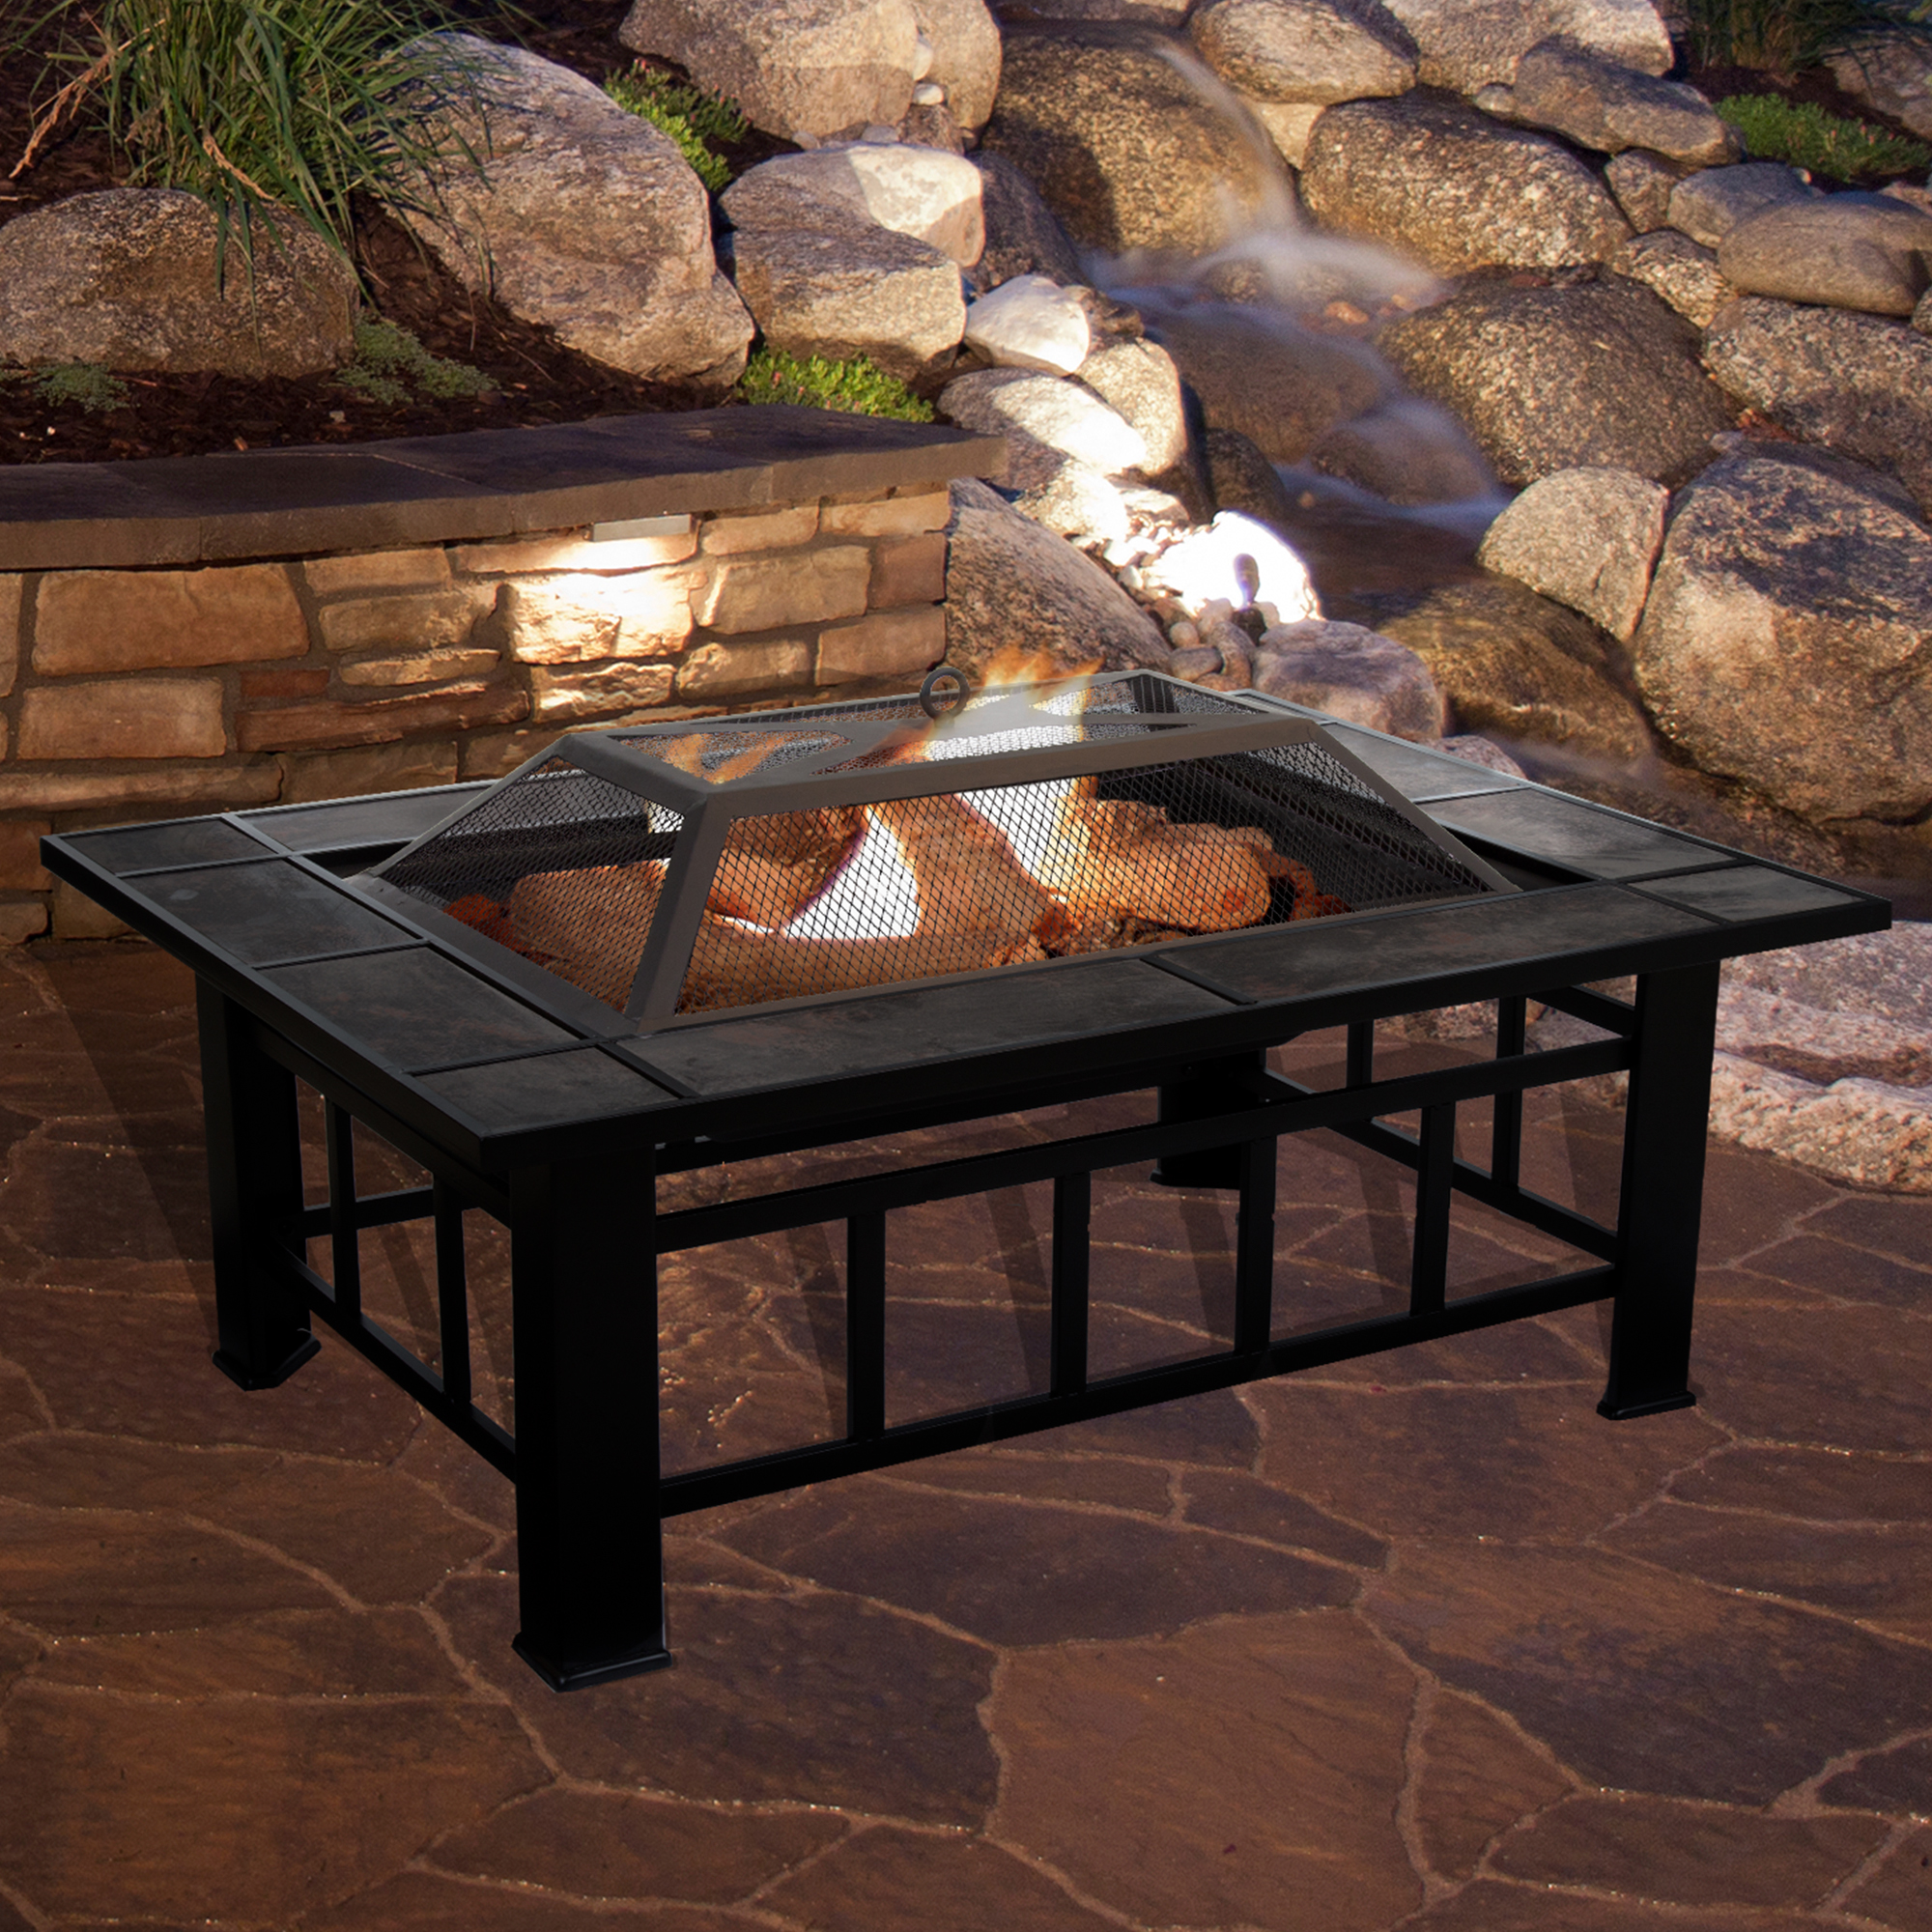 Pure Garden Fire Pit Set, Wood Burning Pit - Includes Screen, Cover and Log Poker - Great for Outdoor and Patio, 37" Marble Tile Rectangular Firepit - image 1 of 7